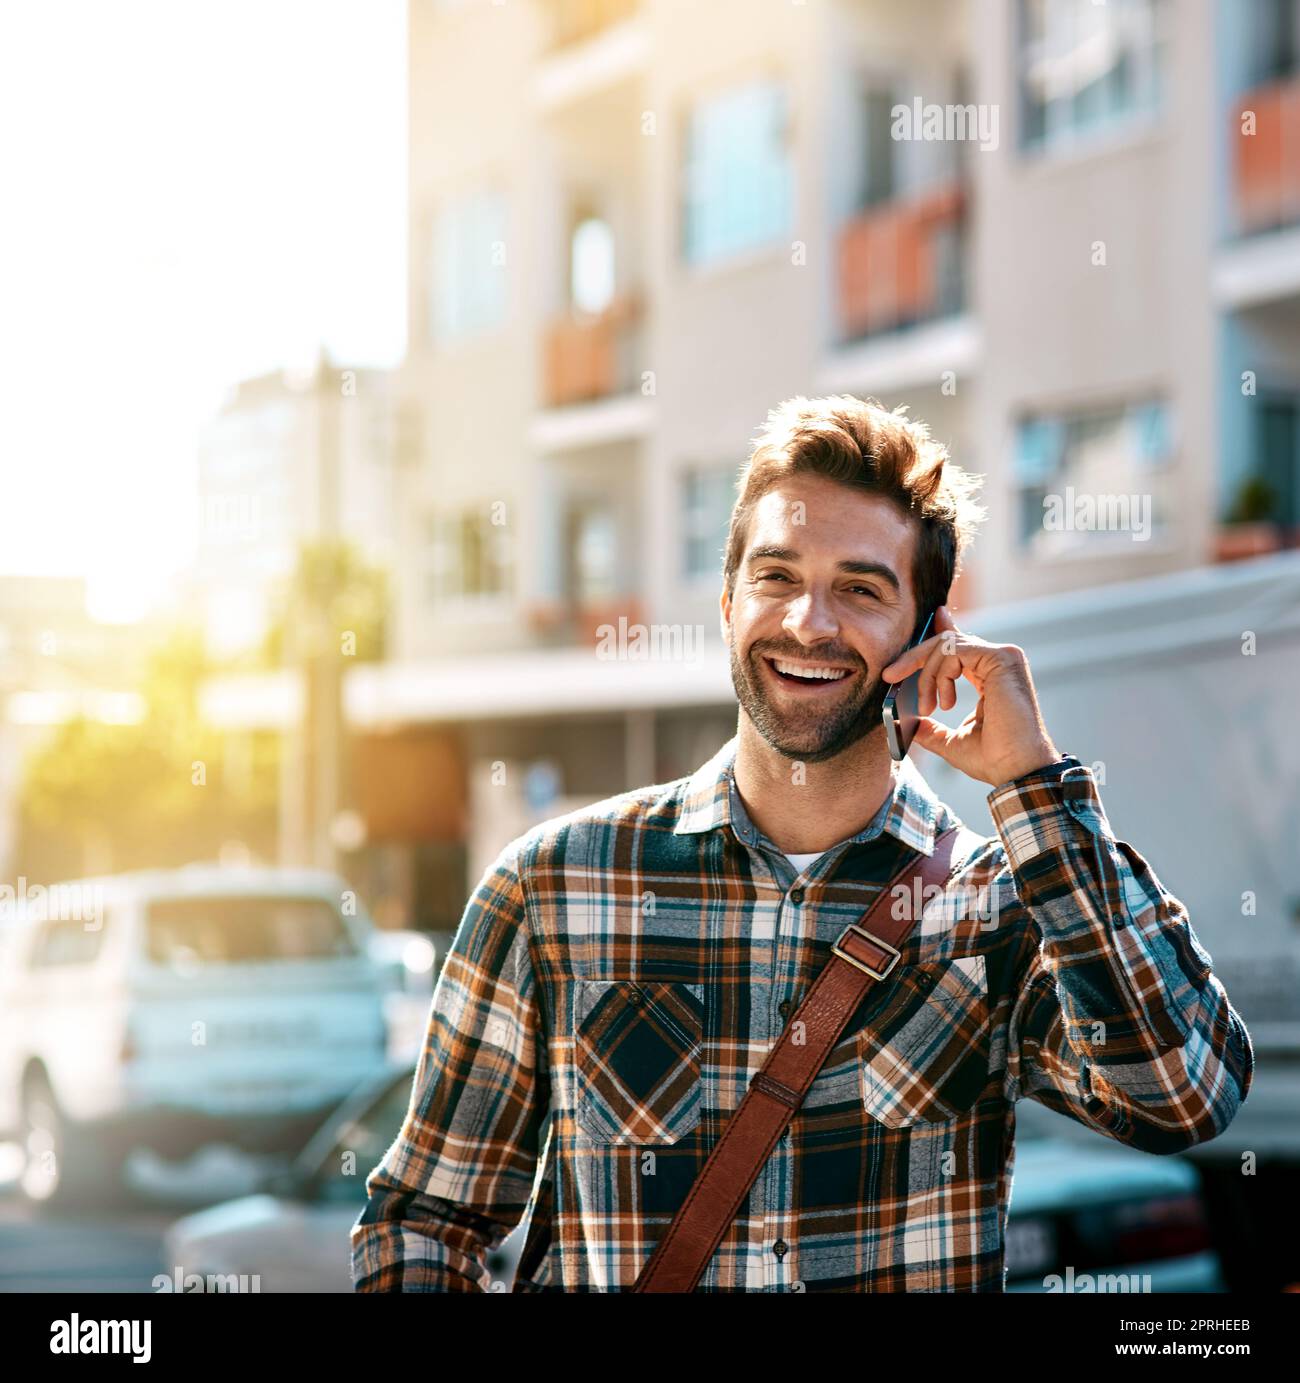 Im in town. Lets hook up. a handsome young man using his mobile phone while  out in the city Stock Photo - Alamy